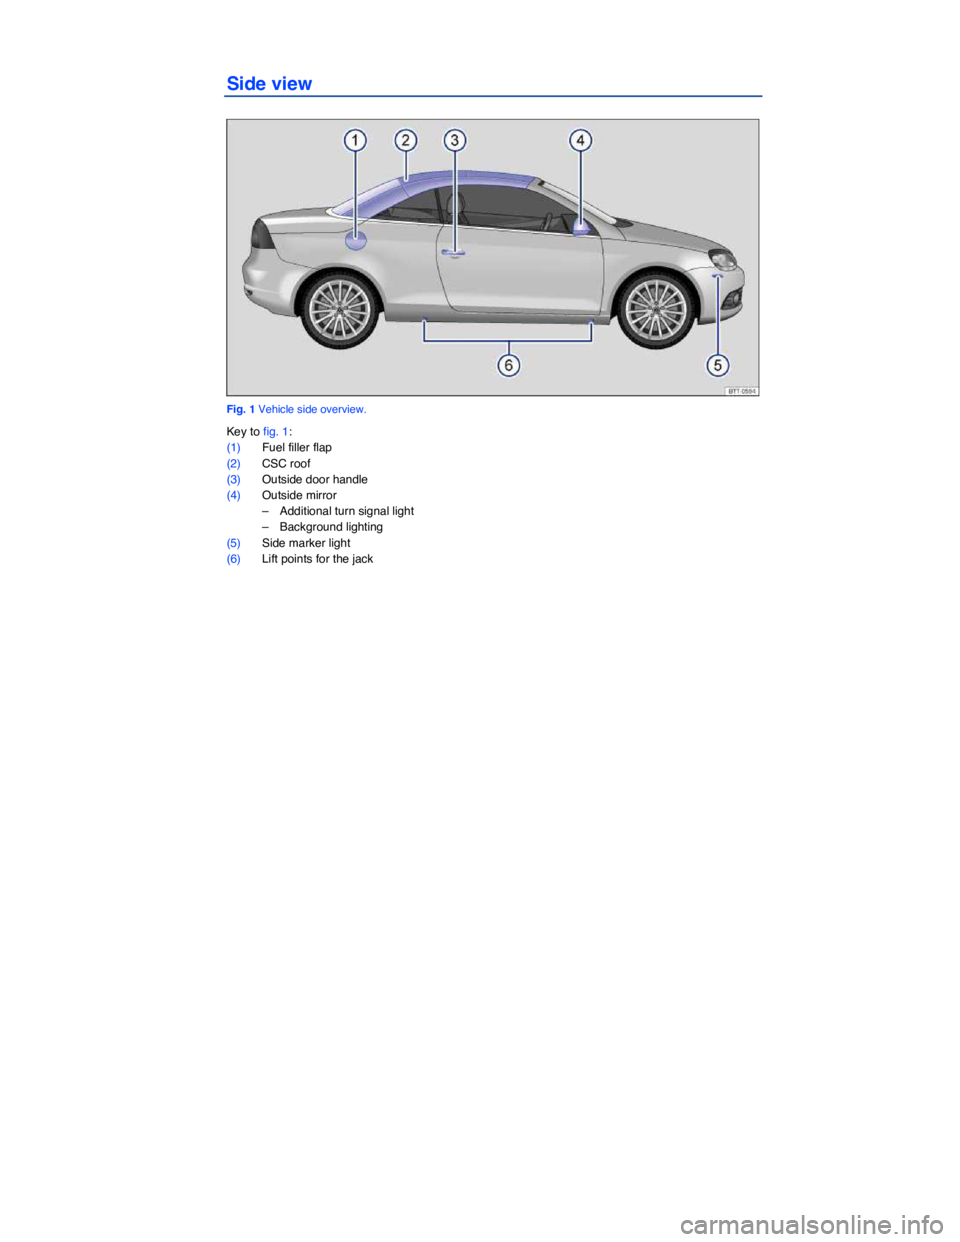 VOLKSWAGEN EOS 2007  Owners Manual  
 
Side view 
 
Fig. 1 Vehicle side overview. 
Key to fig. 1: 
(1) Fuel filler flap  
(2) CSC roof  
(3) Outside door handle  
(4) Outside mirror  
–  Additional turn signal light  
–  Background